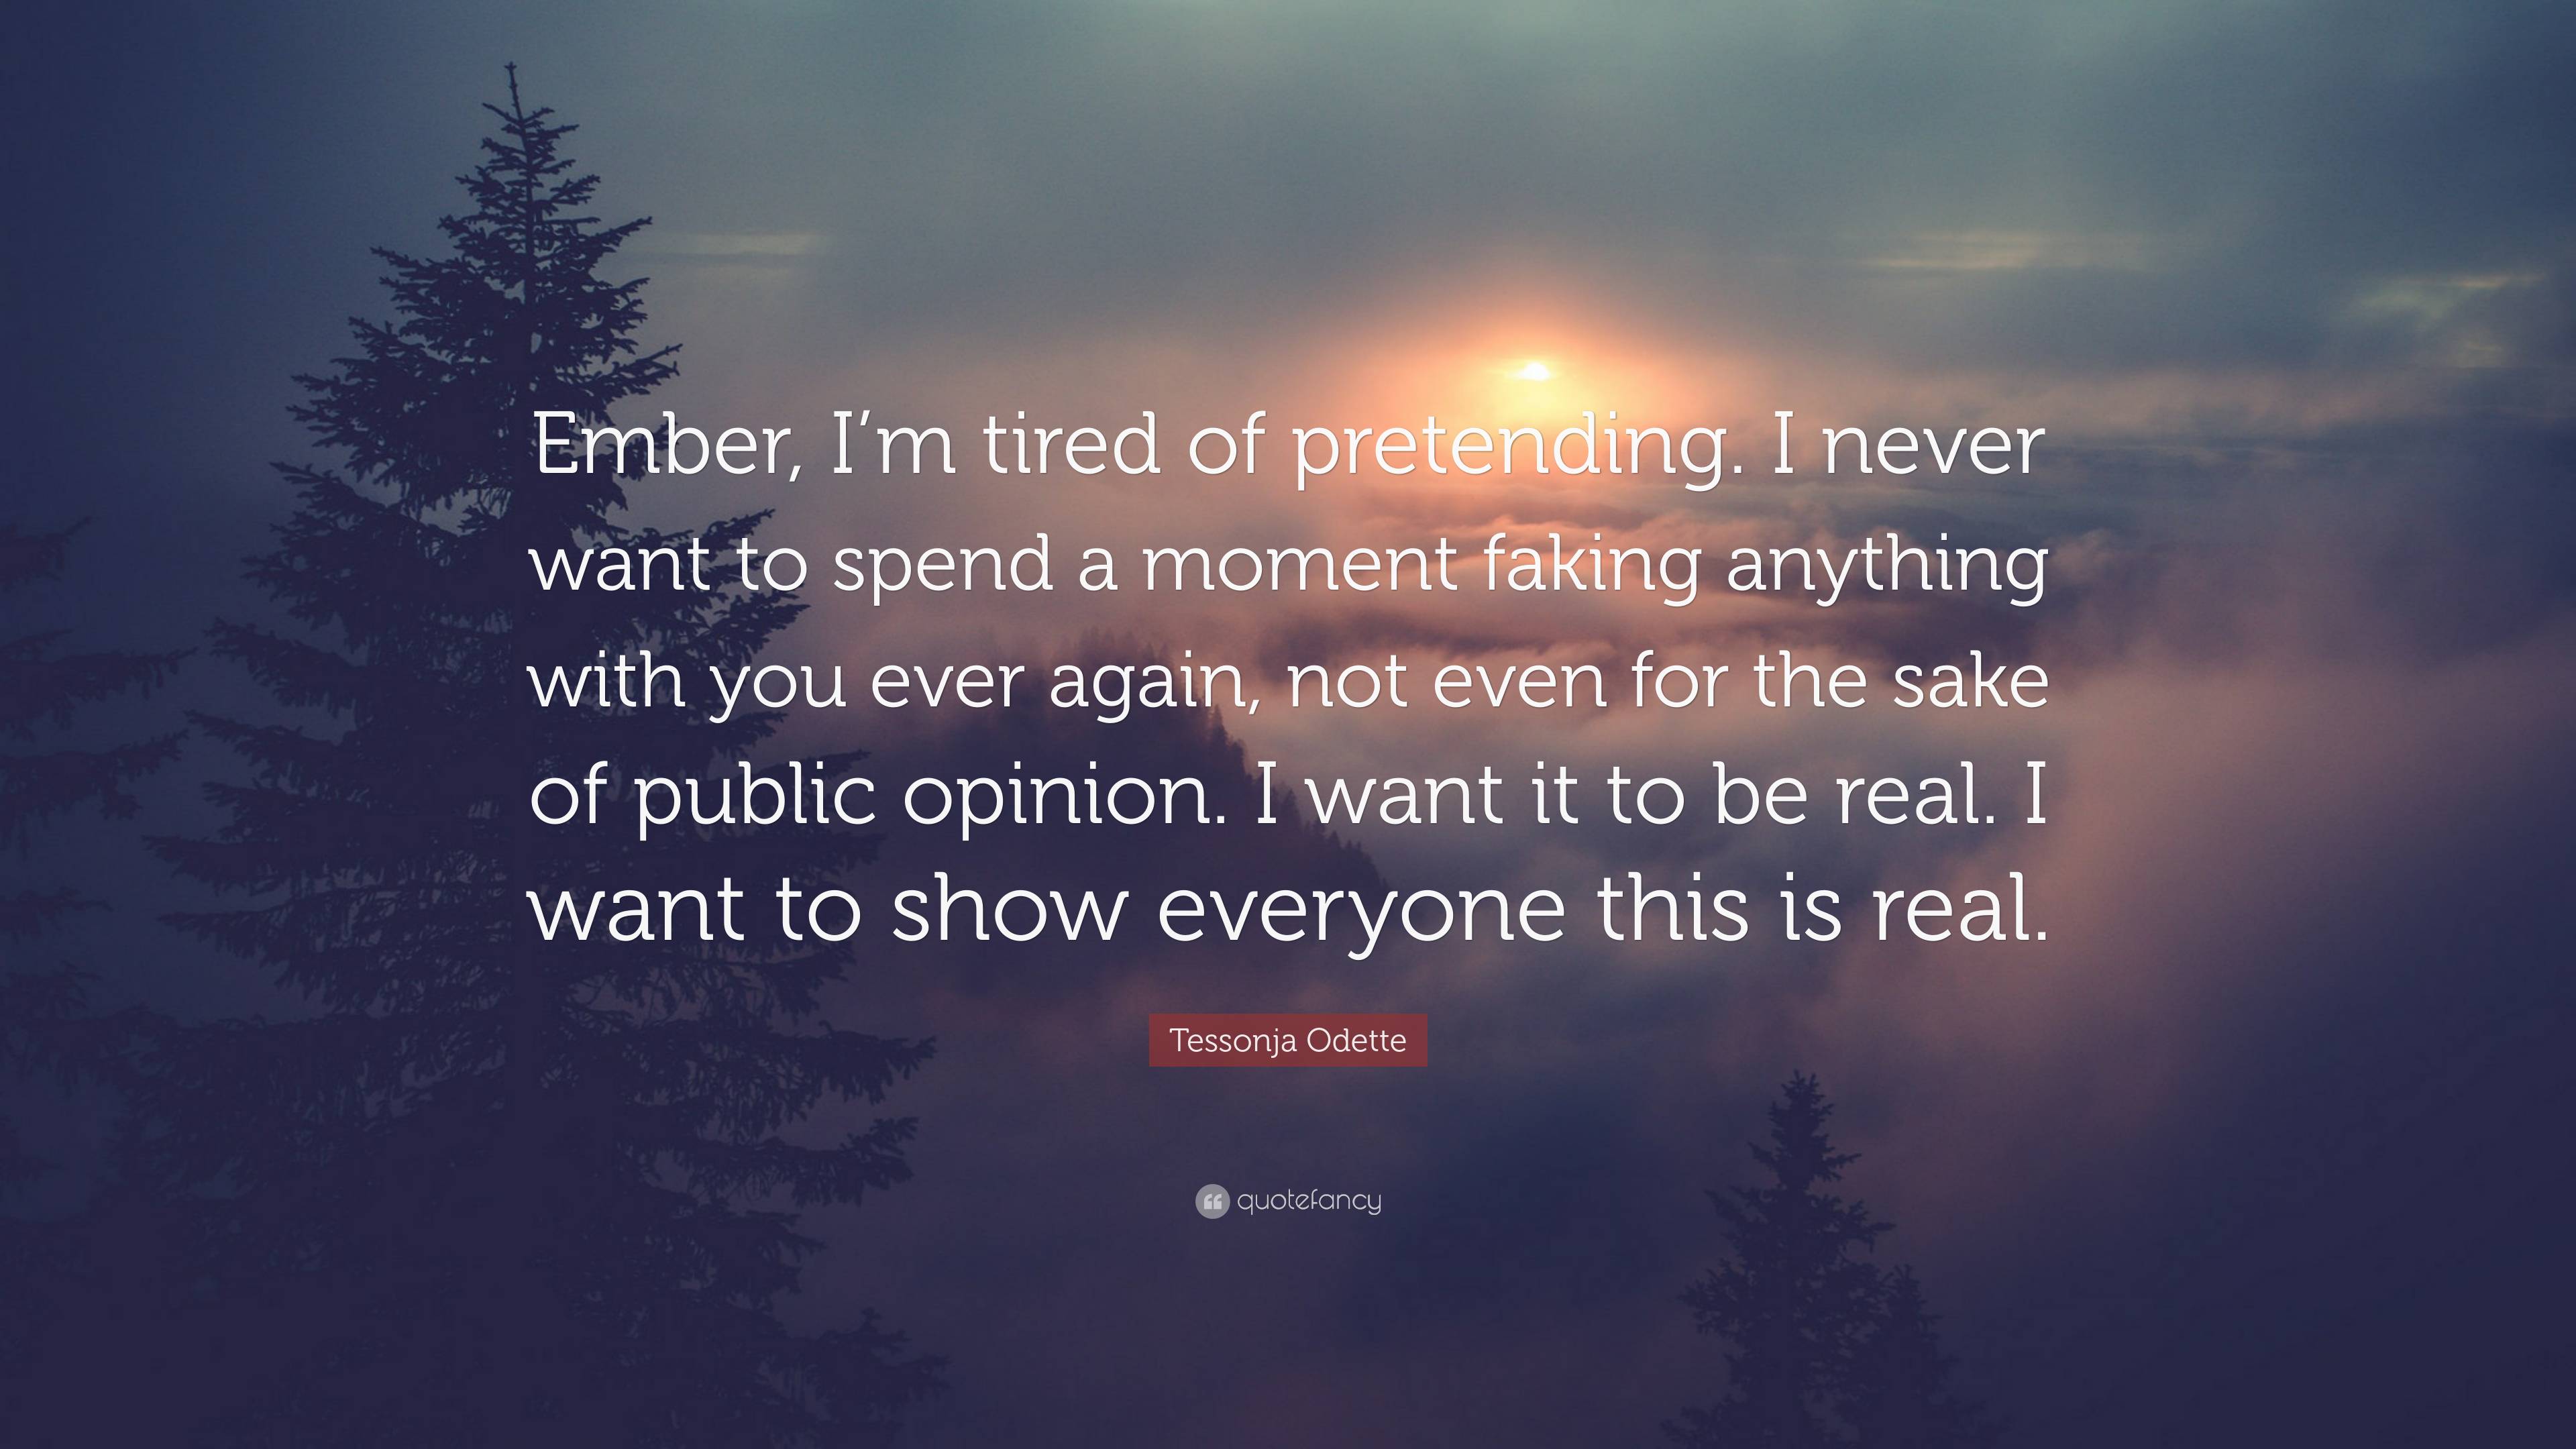 Everything is., I'm Tired of Pretending It's Not